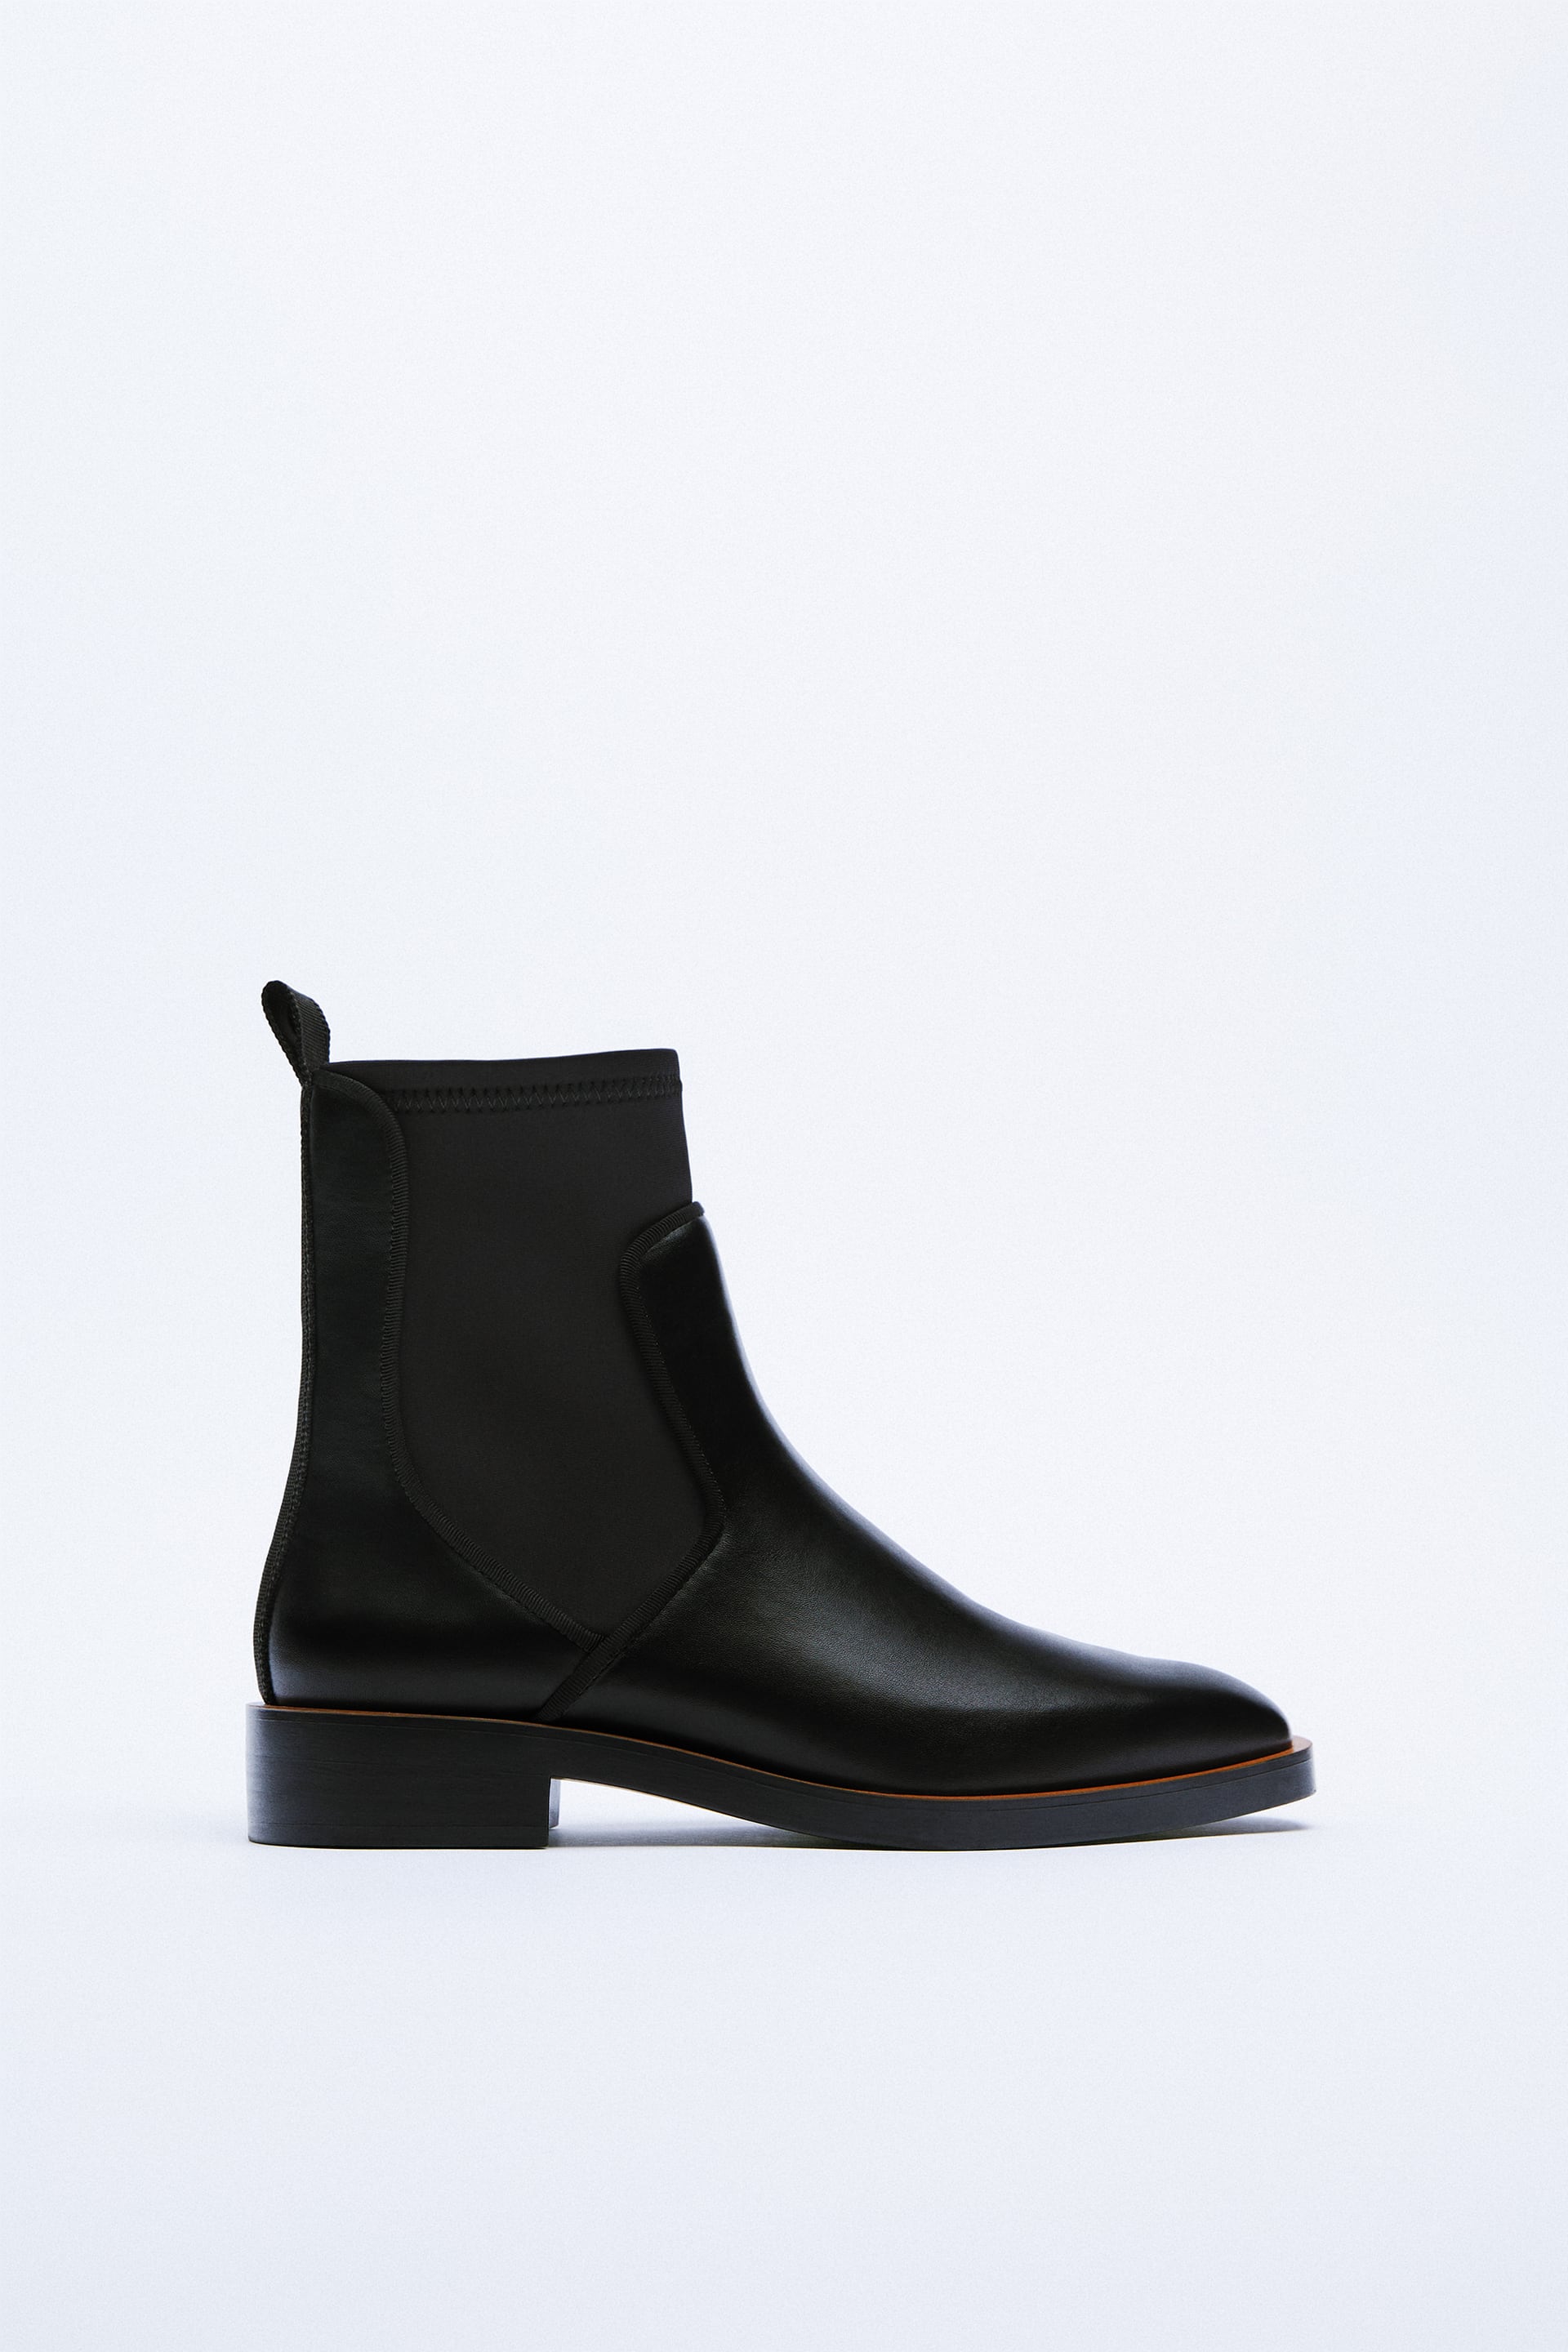 MKOP Womens Bootie Boots 